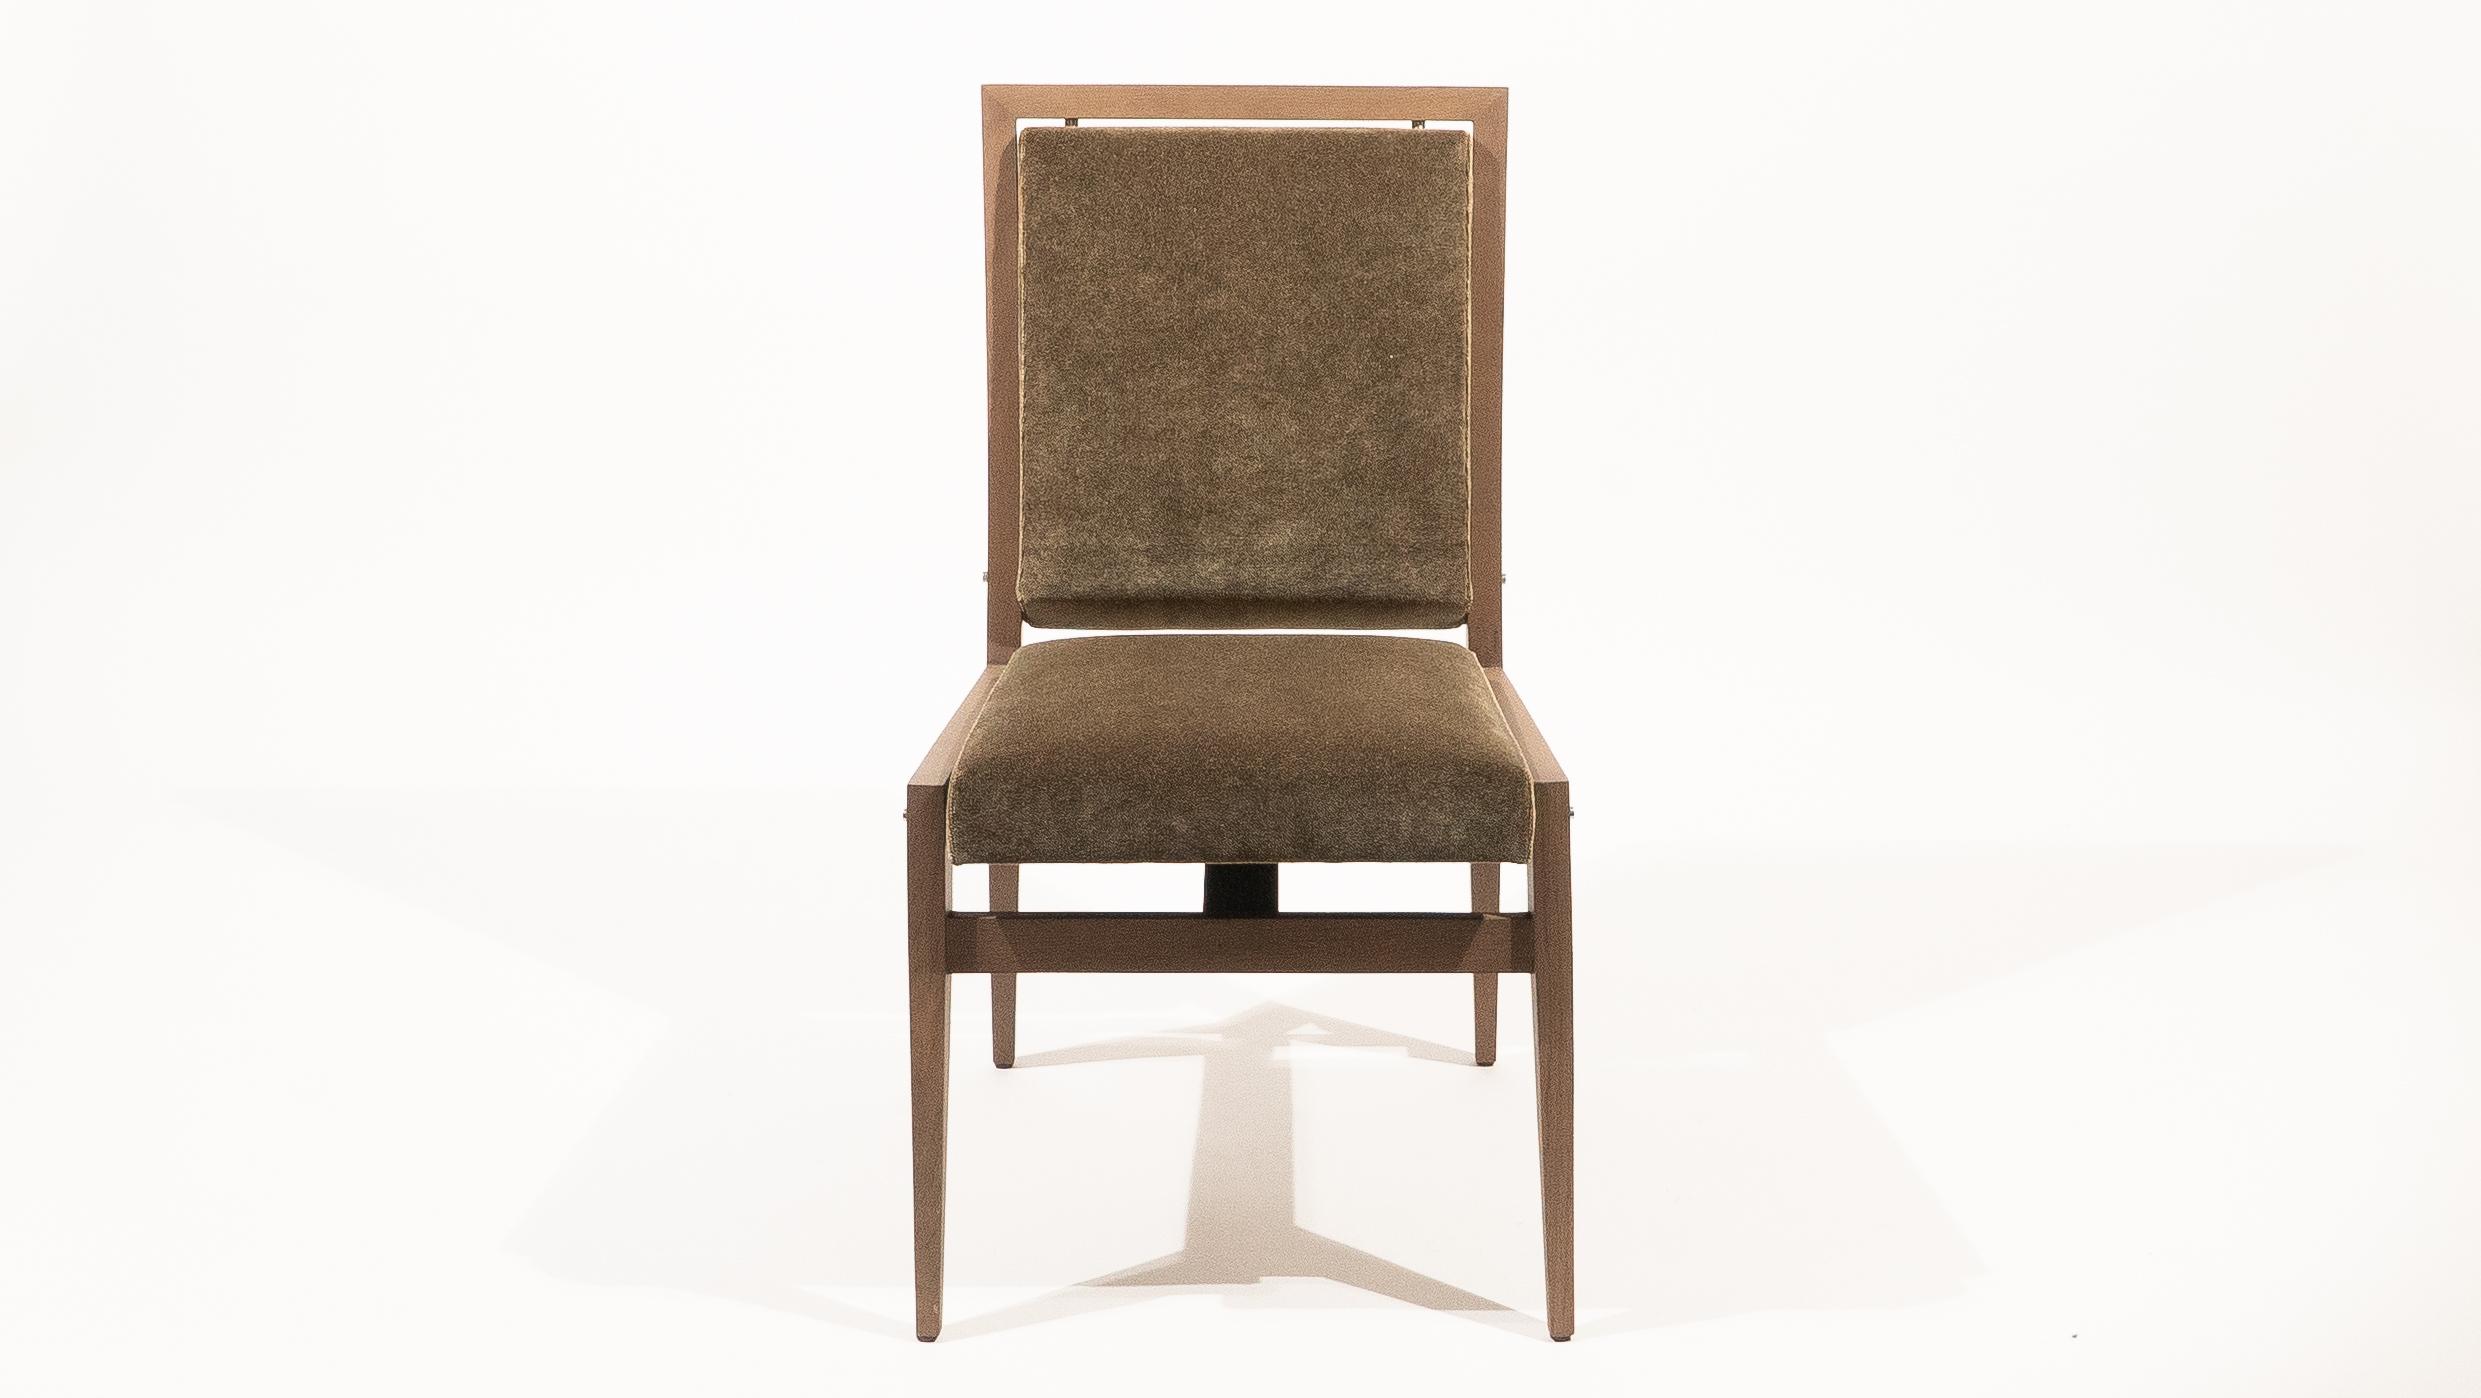 This dining room chair was designed by Maxime Old in 1960 for the Rouen City Council. One of the designer’s most emblematic projects. The Anne Jacquemin Sablon gallery presents a contemporary edition of the council chair which is characterized by